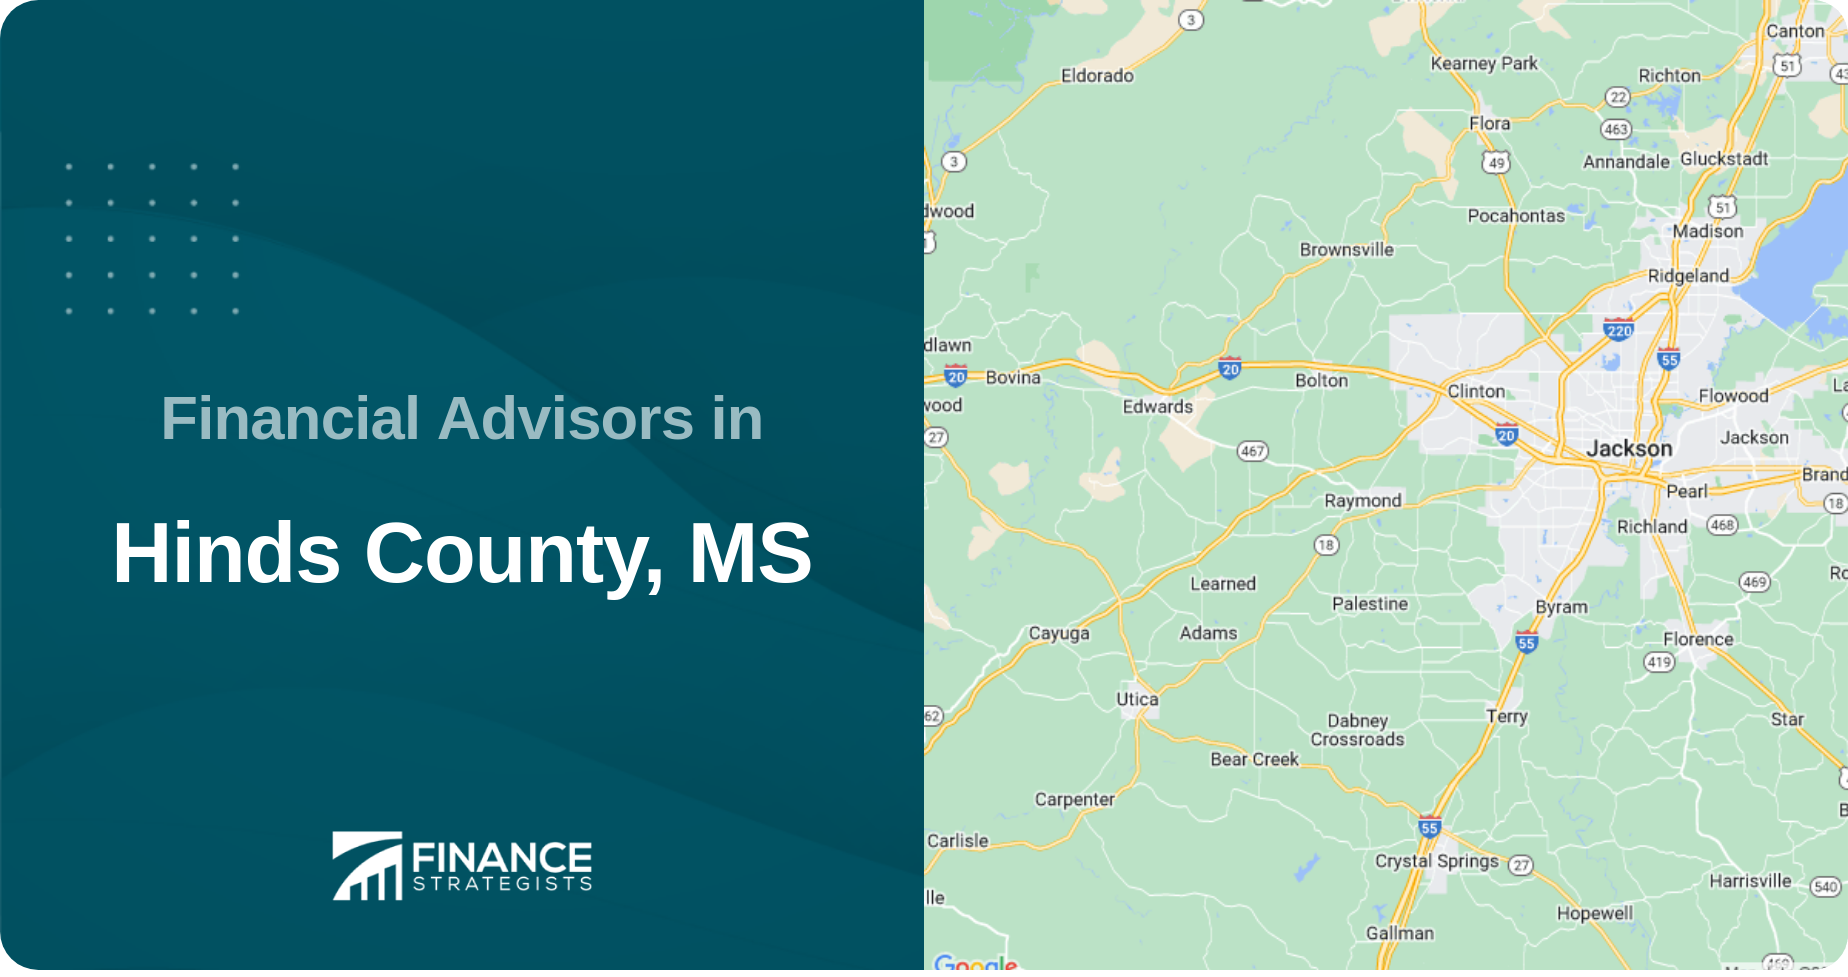 Financial Advisors in Hinds County, MS